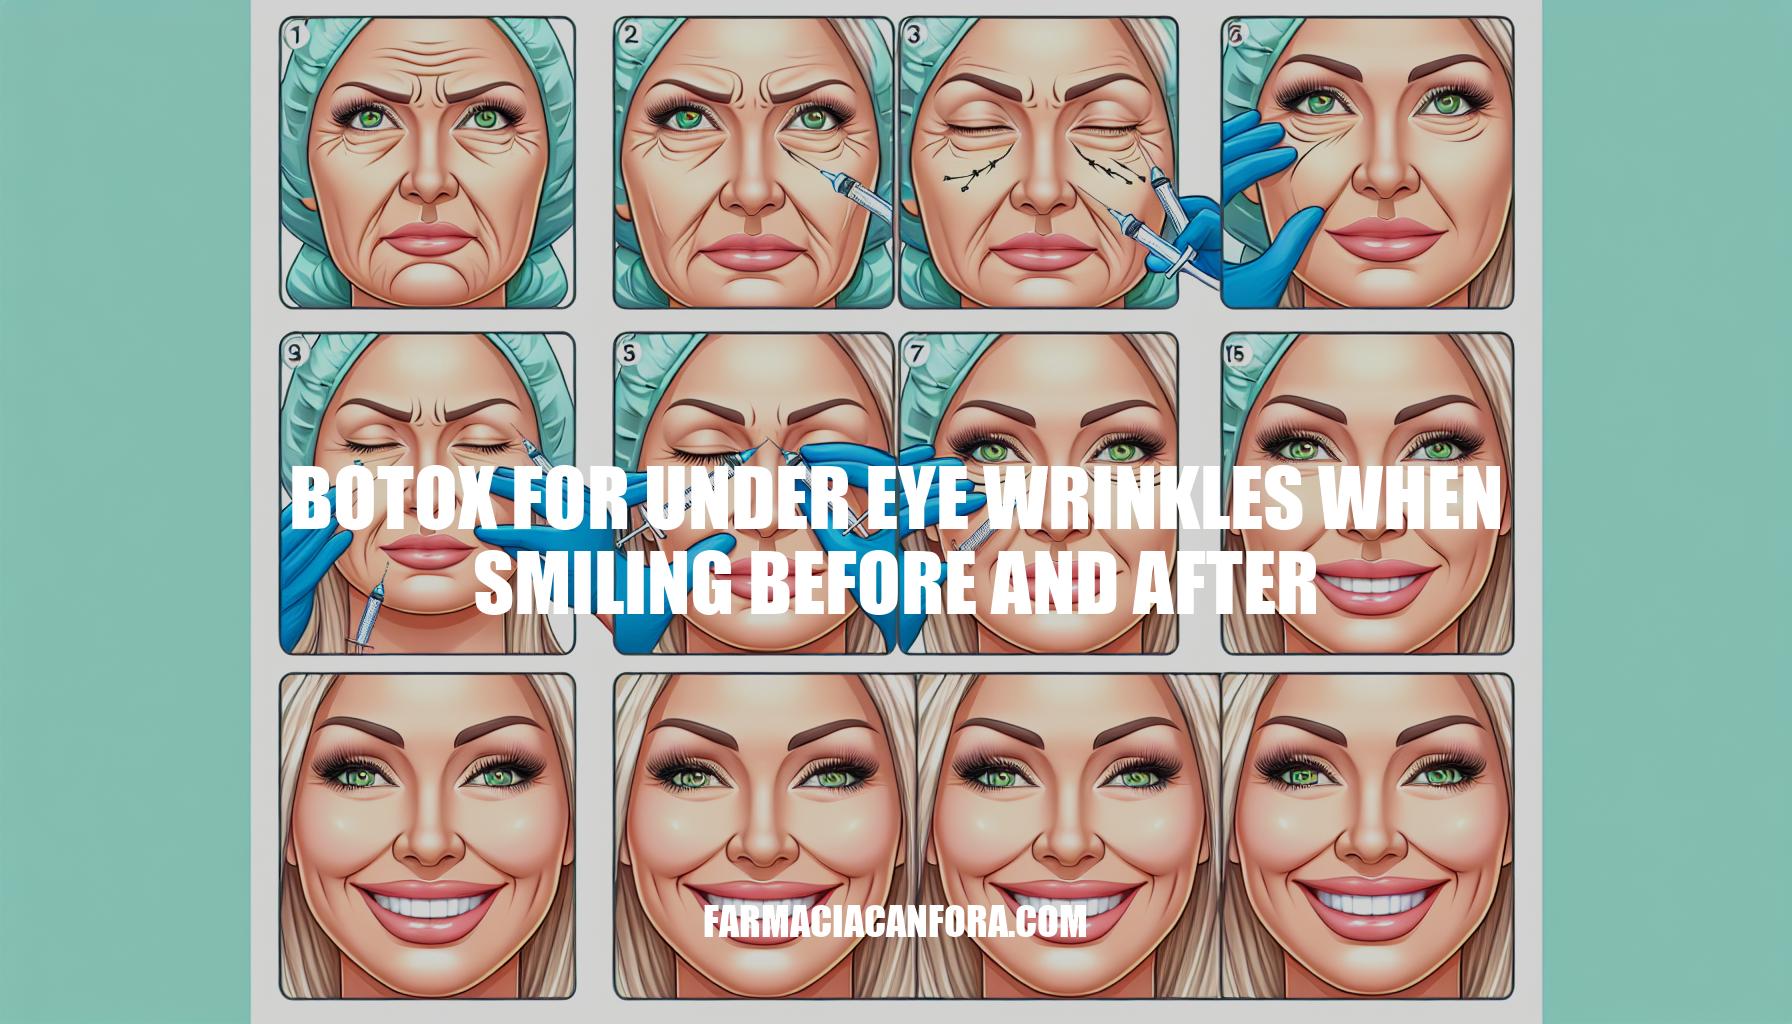 Botox for Under Eye Wrinkles When Smiling Before and After: A Comprehensive Guide